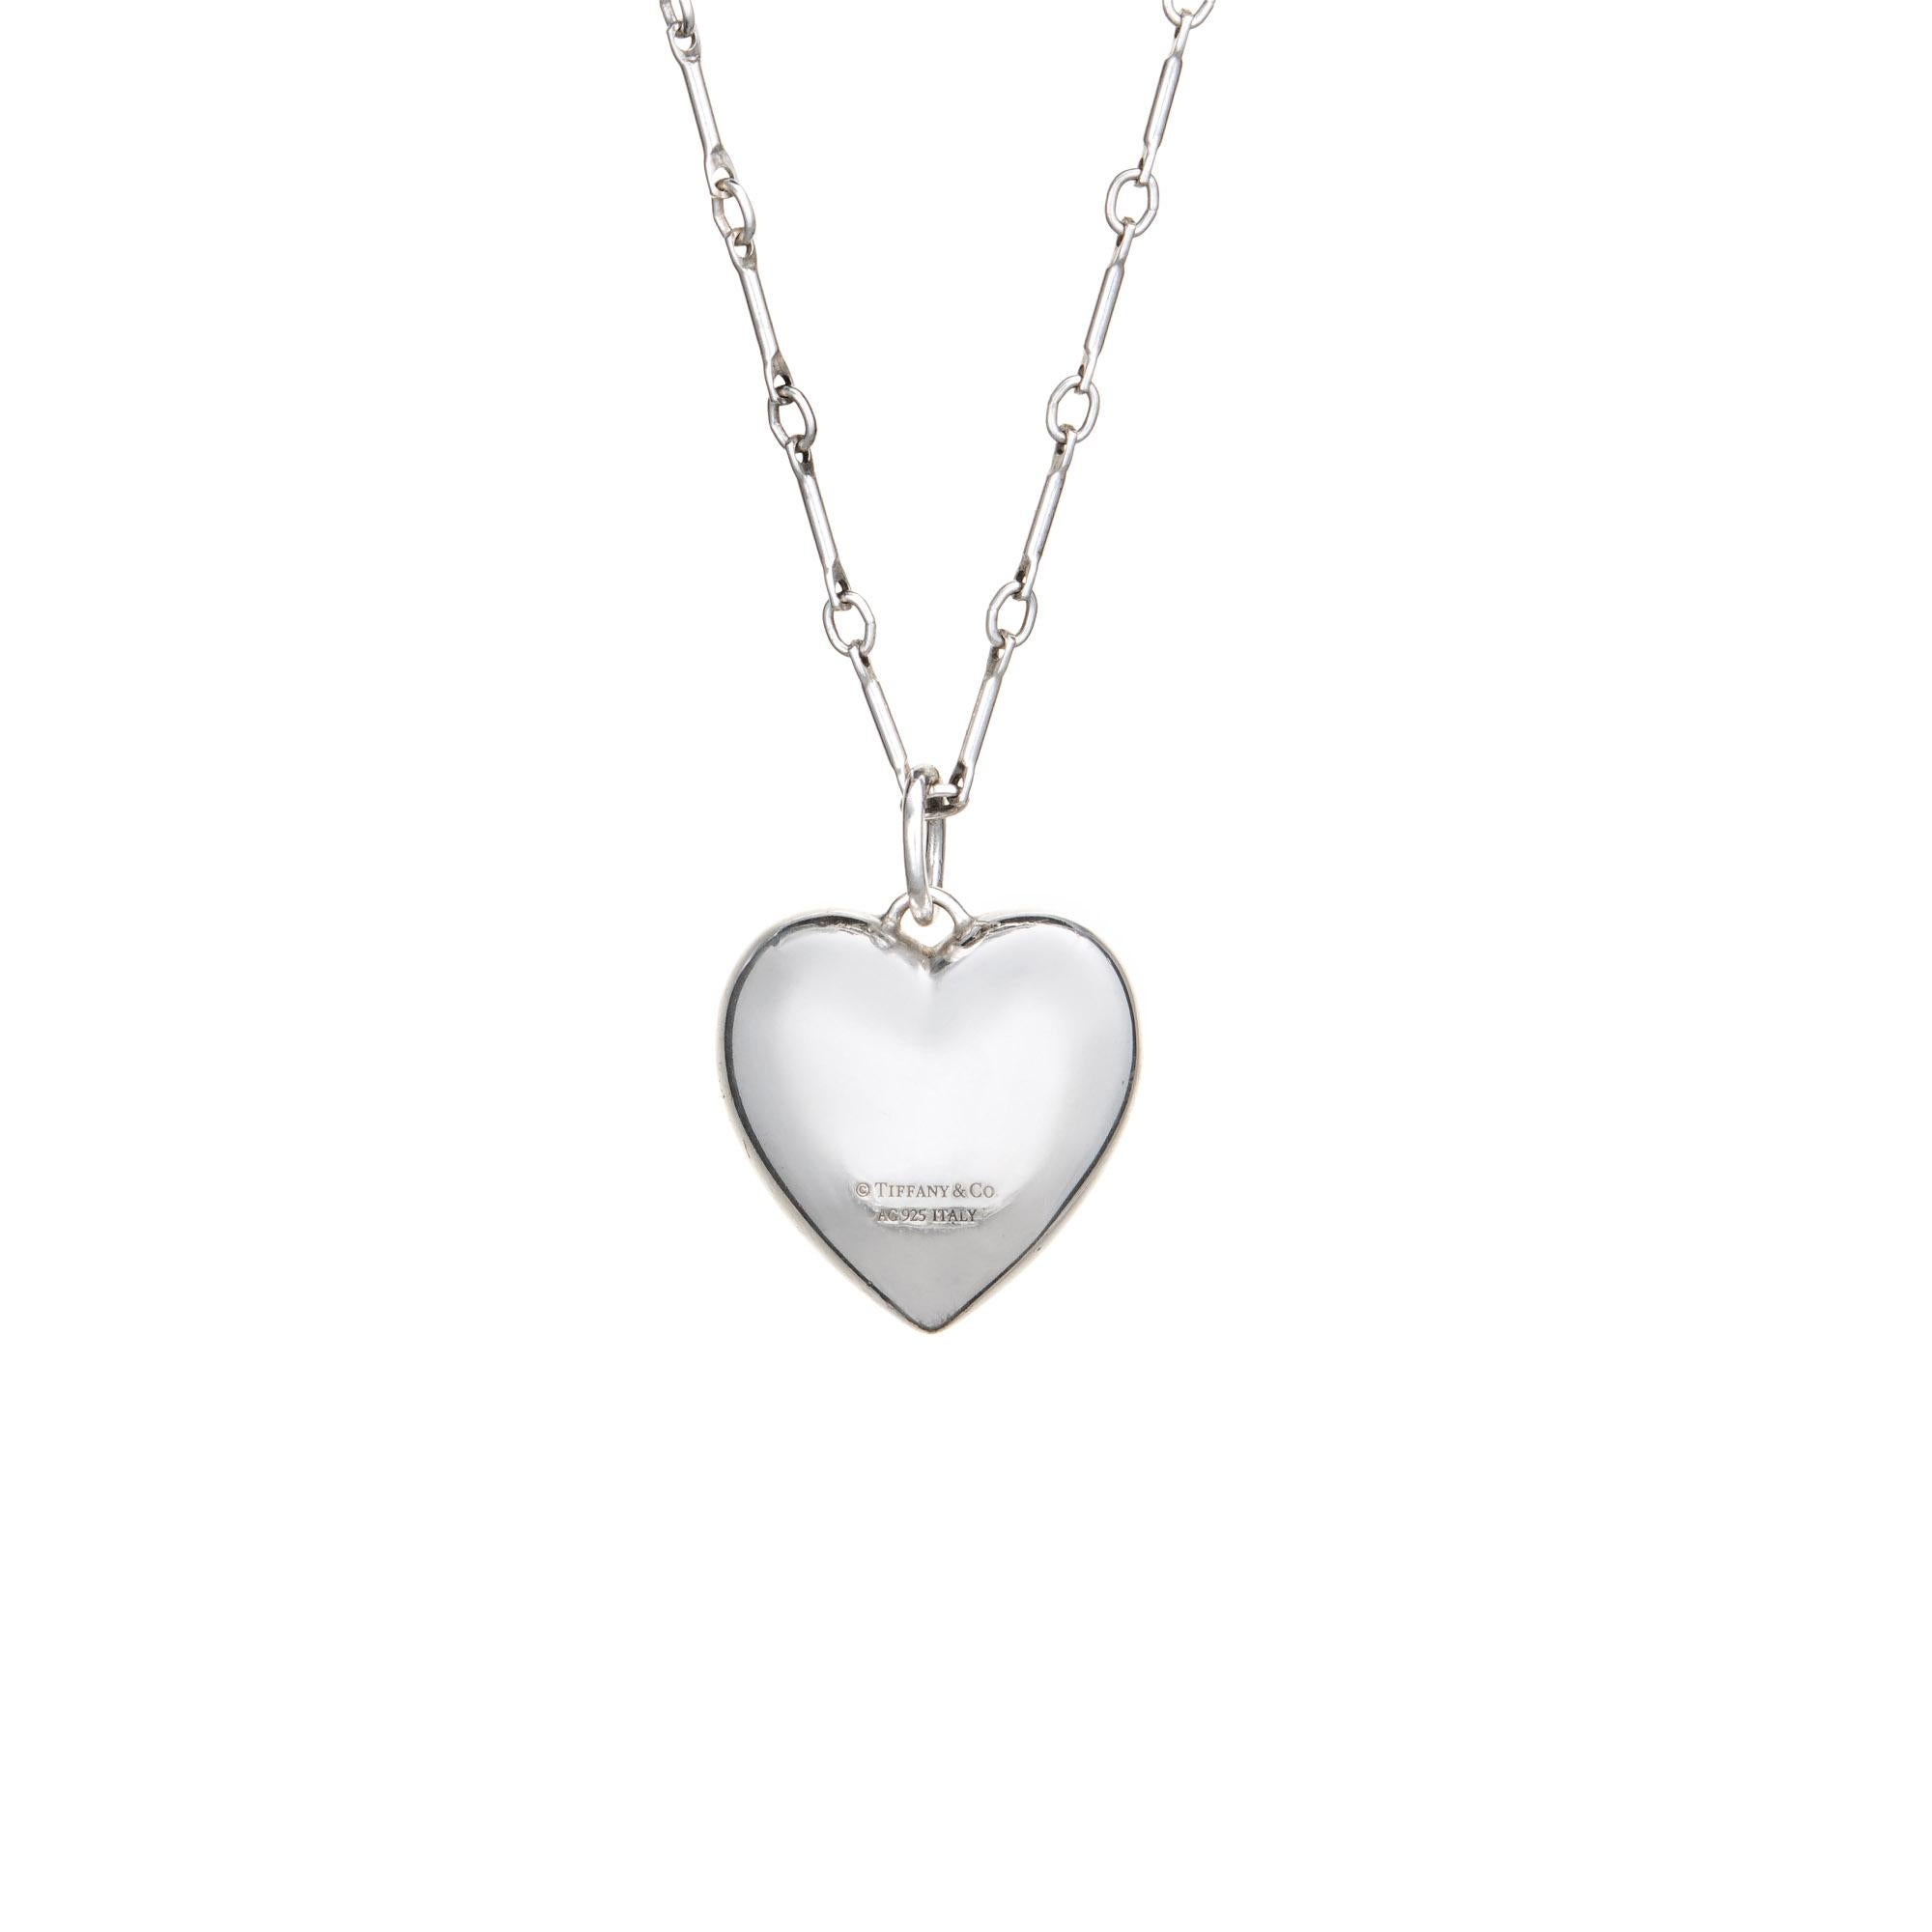 Elegant and finely detailed estate Tiffany & Co sterling silver heart necklace.  

The puffed heart is medium sized in scale, measuring 3/4 inches. Also included is the fine bar link Tiffany & Co chain measuring 18 inches in length. The necklace